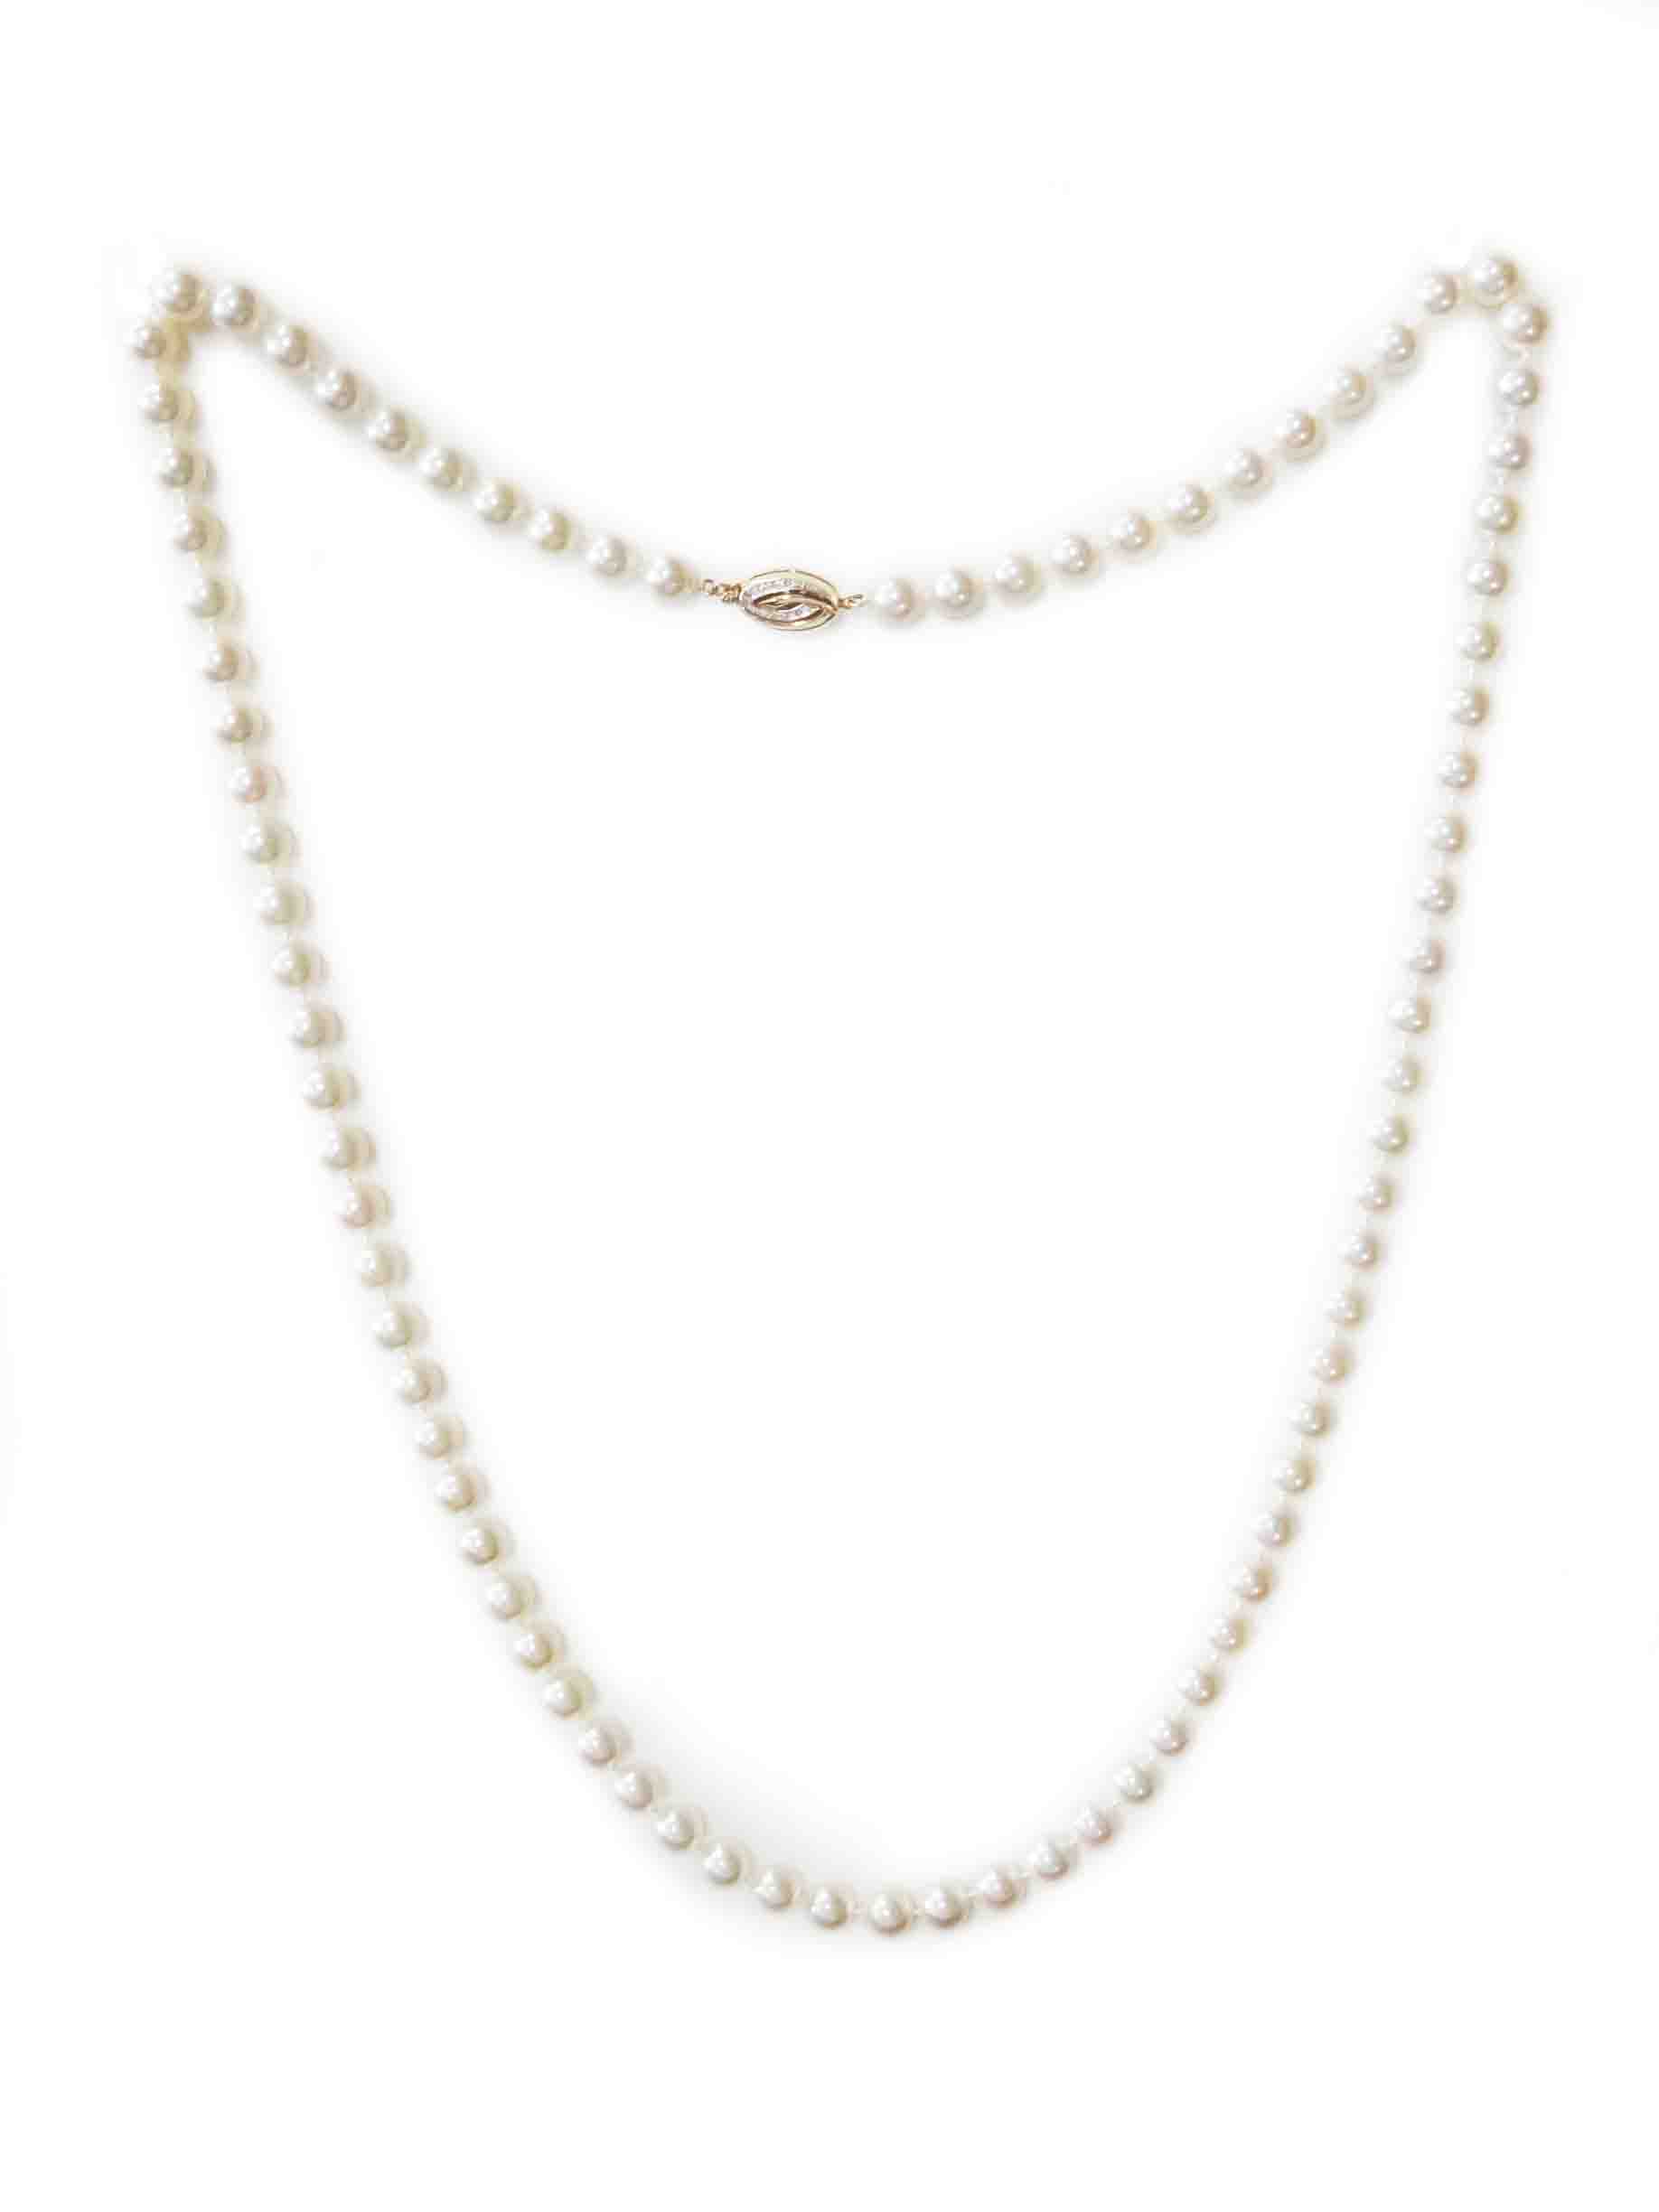 Peach Asymmetrical Oval Pearl Beaded Chain Necklace With Sterling Silver